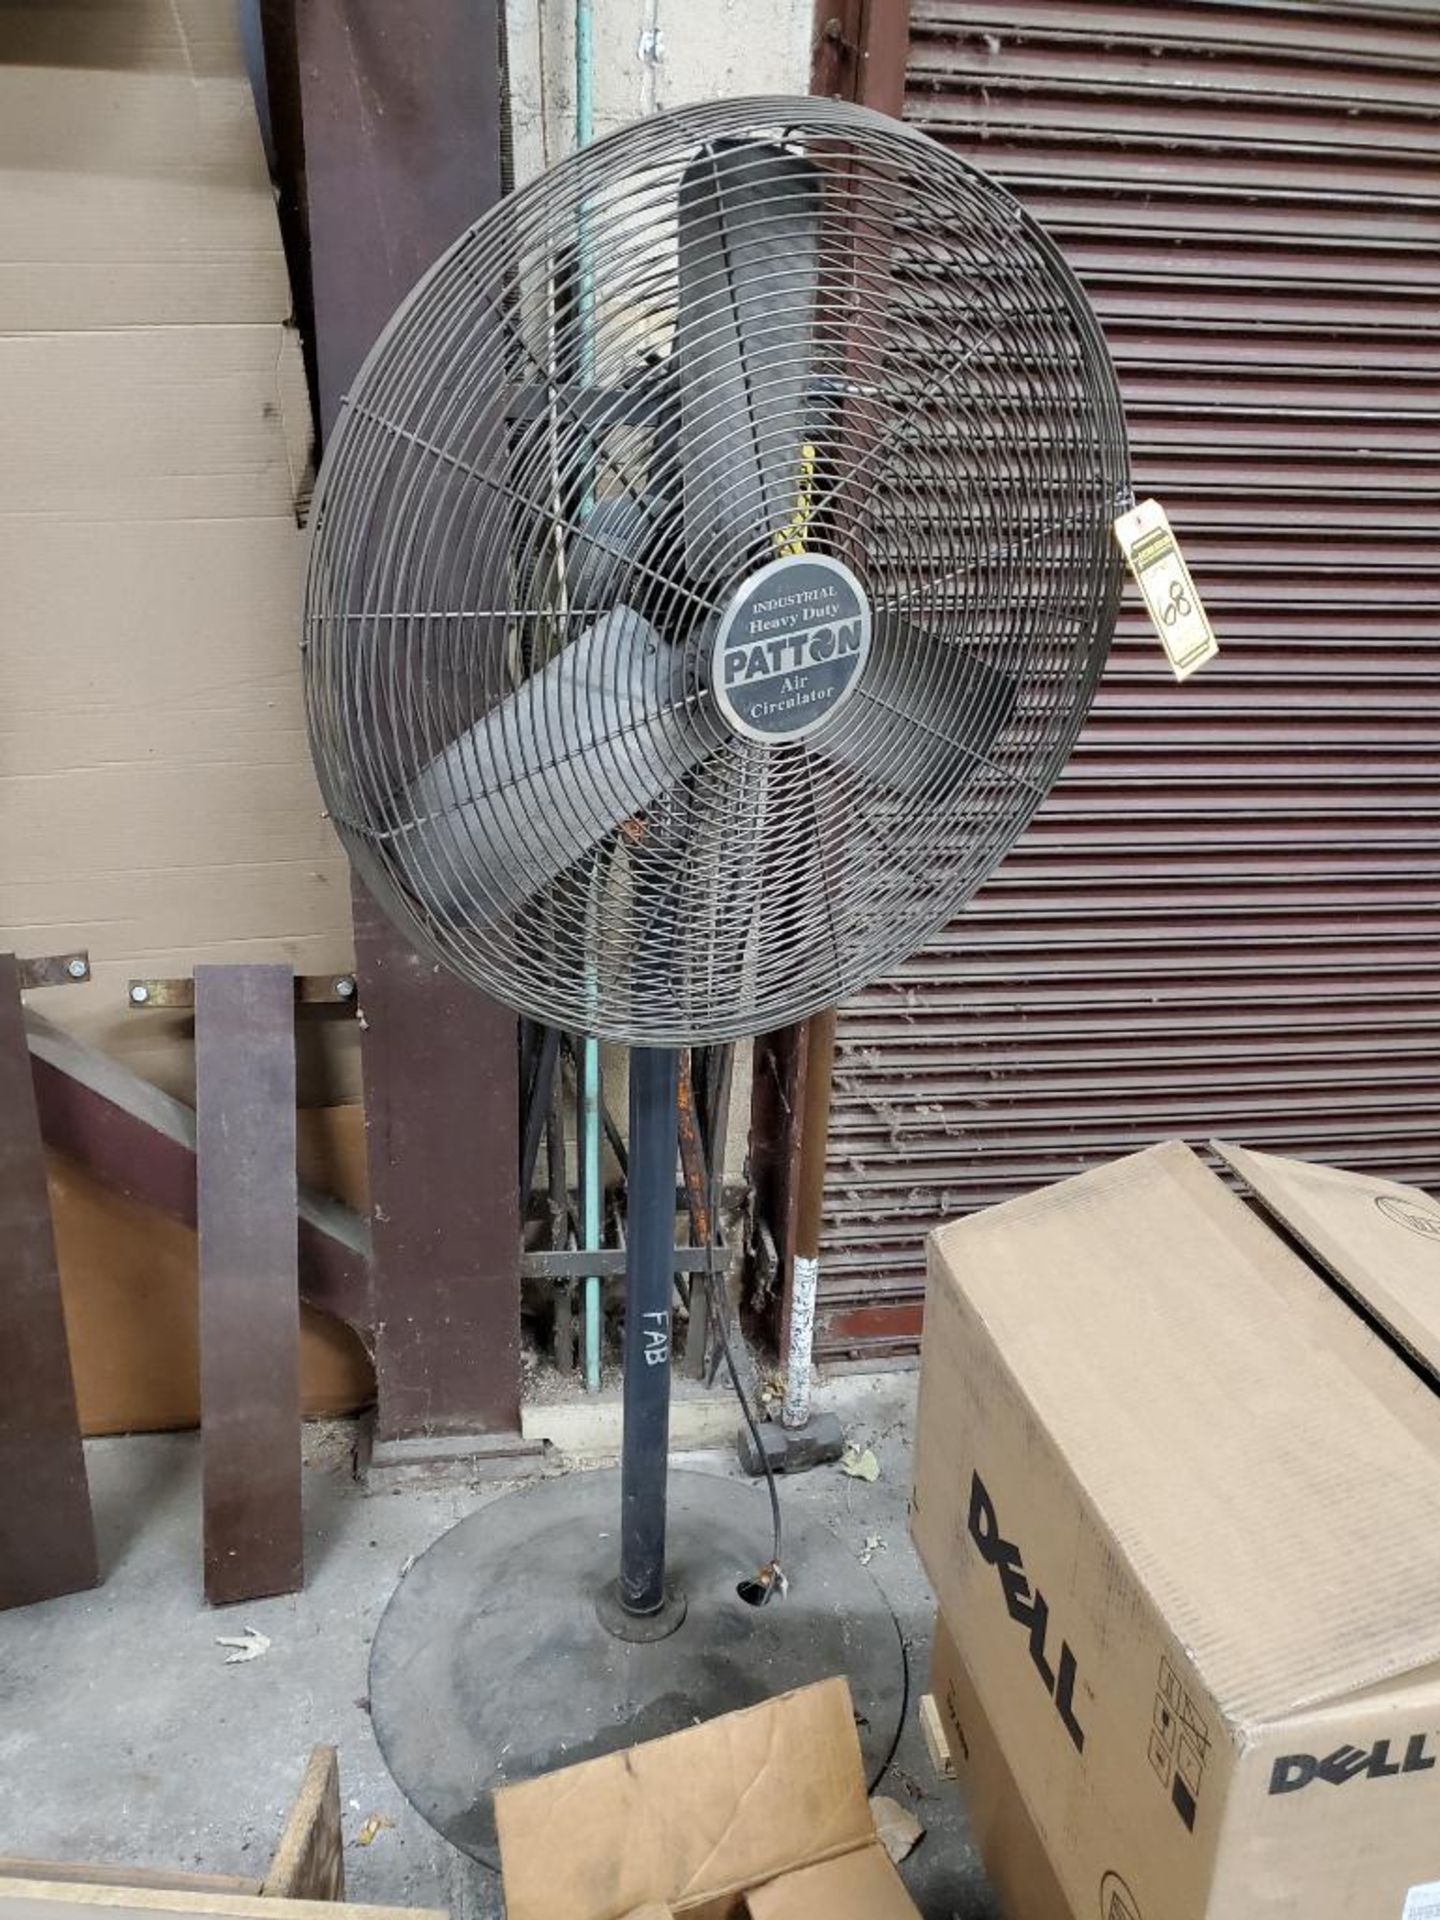 (5x) Industrial Pedestal Fans; Patton & Other Makes, Up To 32"